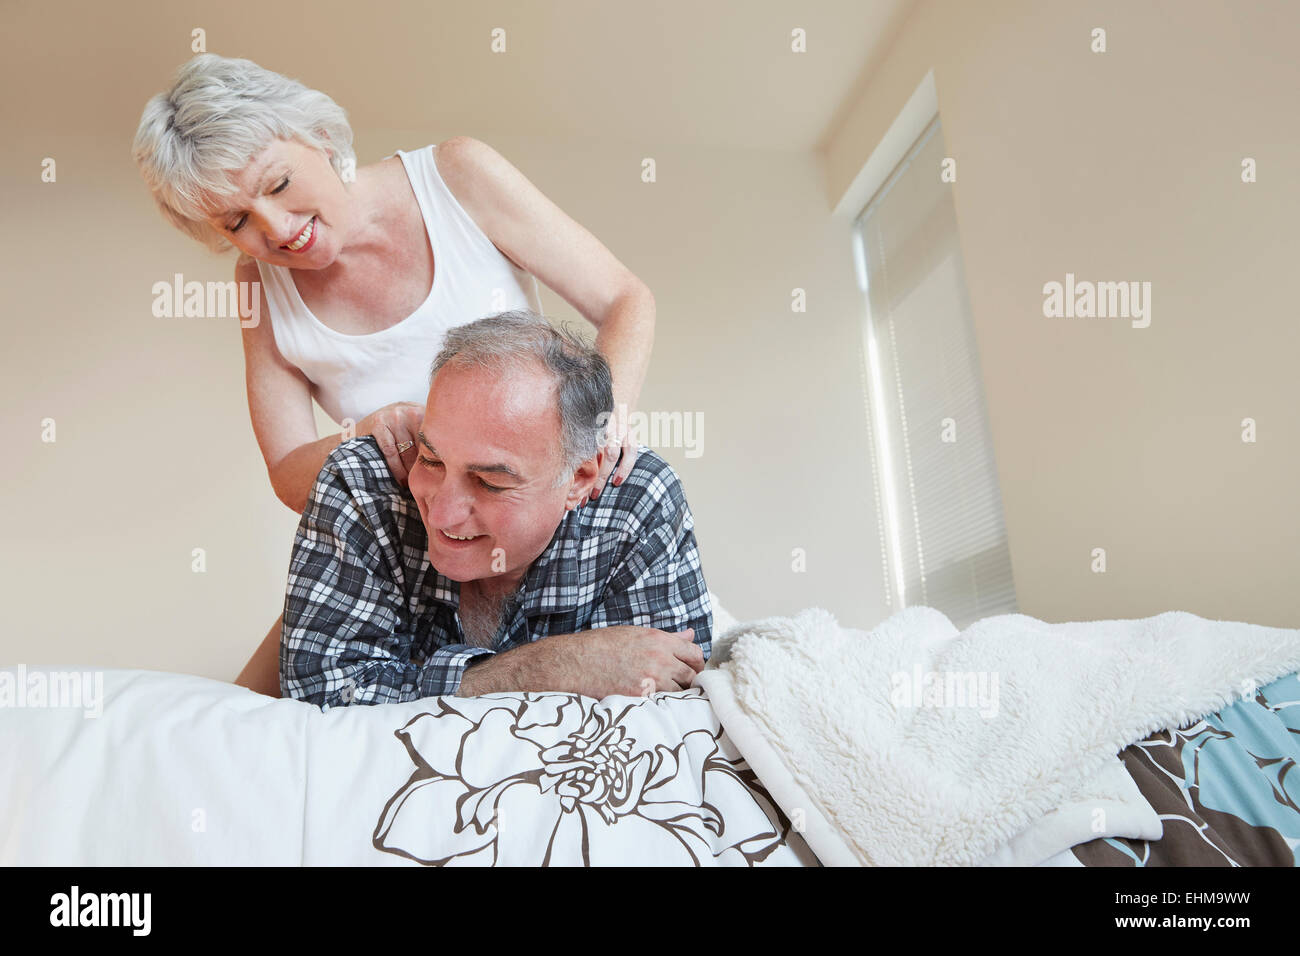 Older woman giving husband back massage on bed Stock Photo